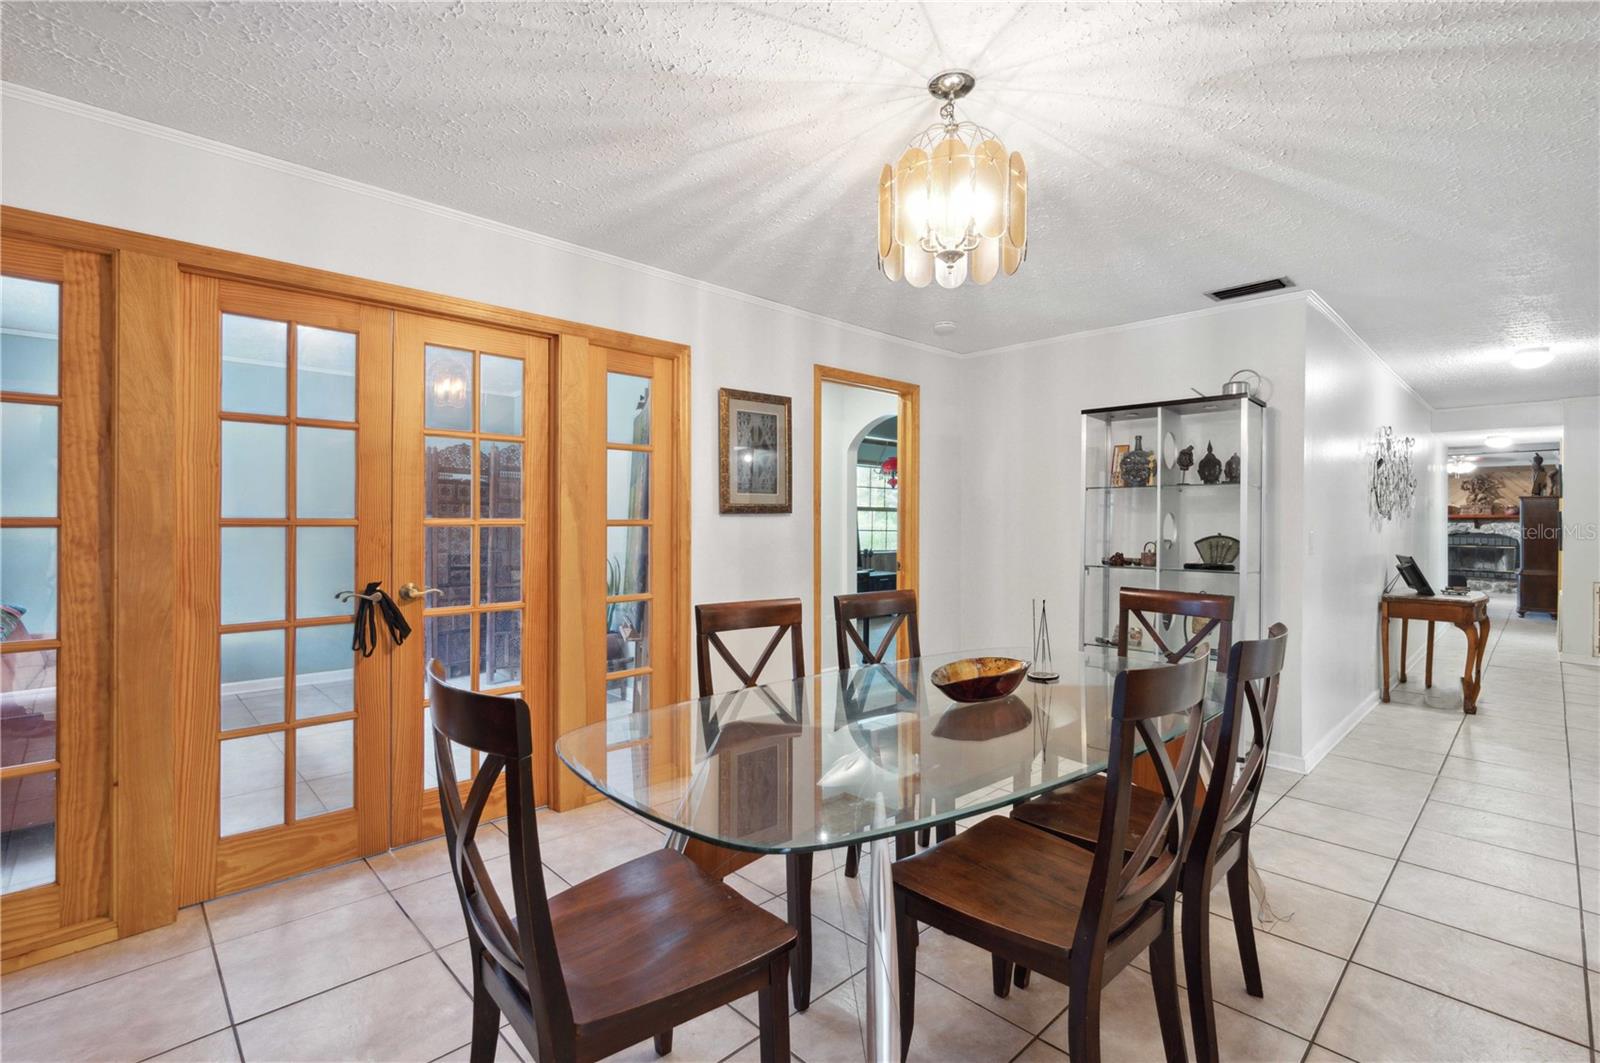 Formal dining room leading to sun room